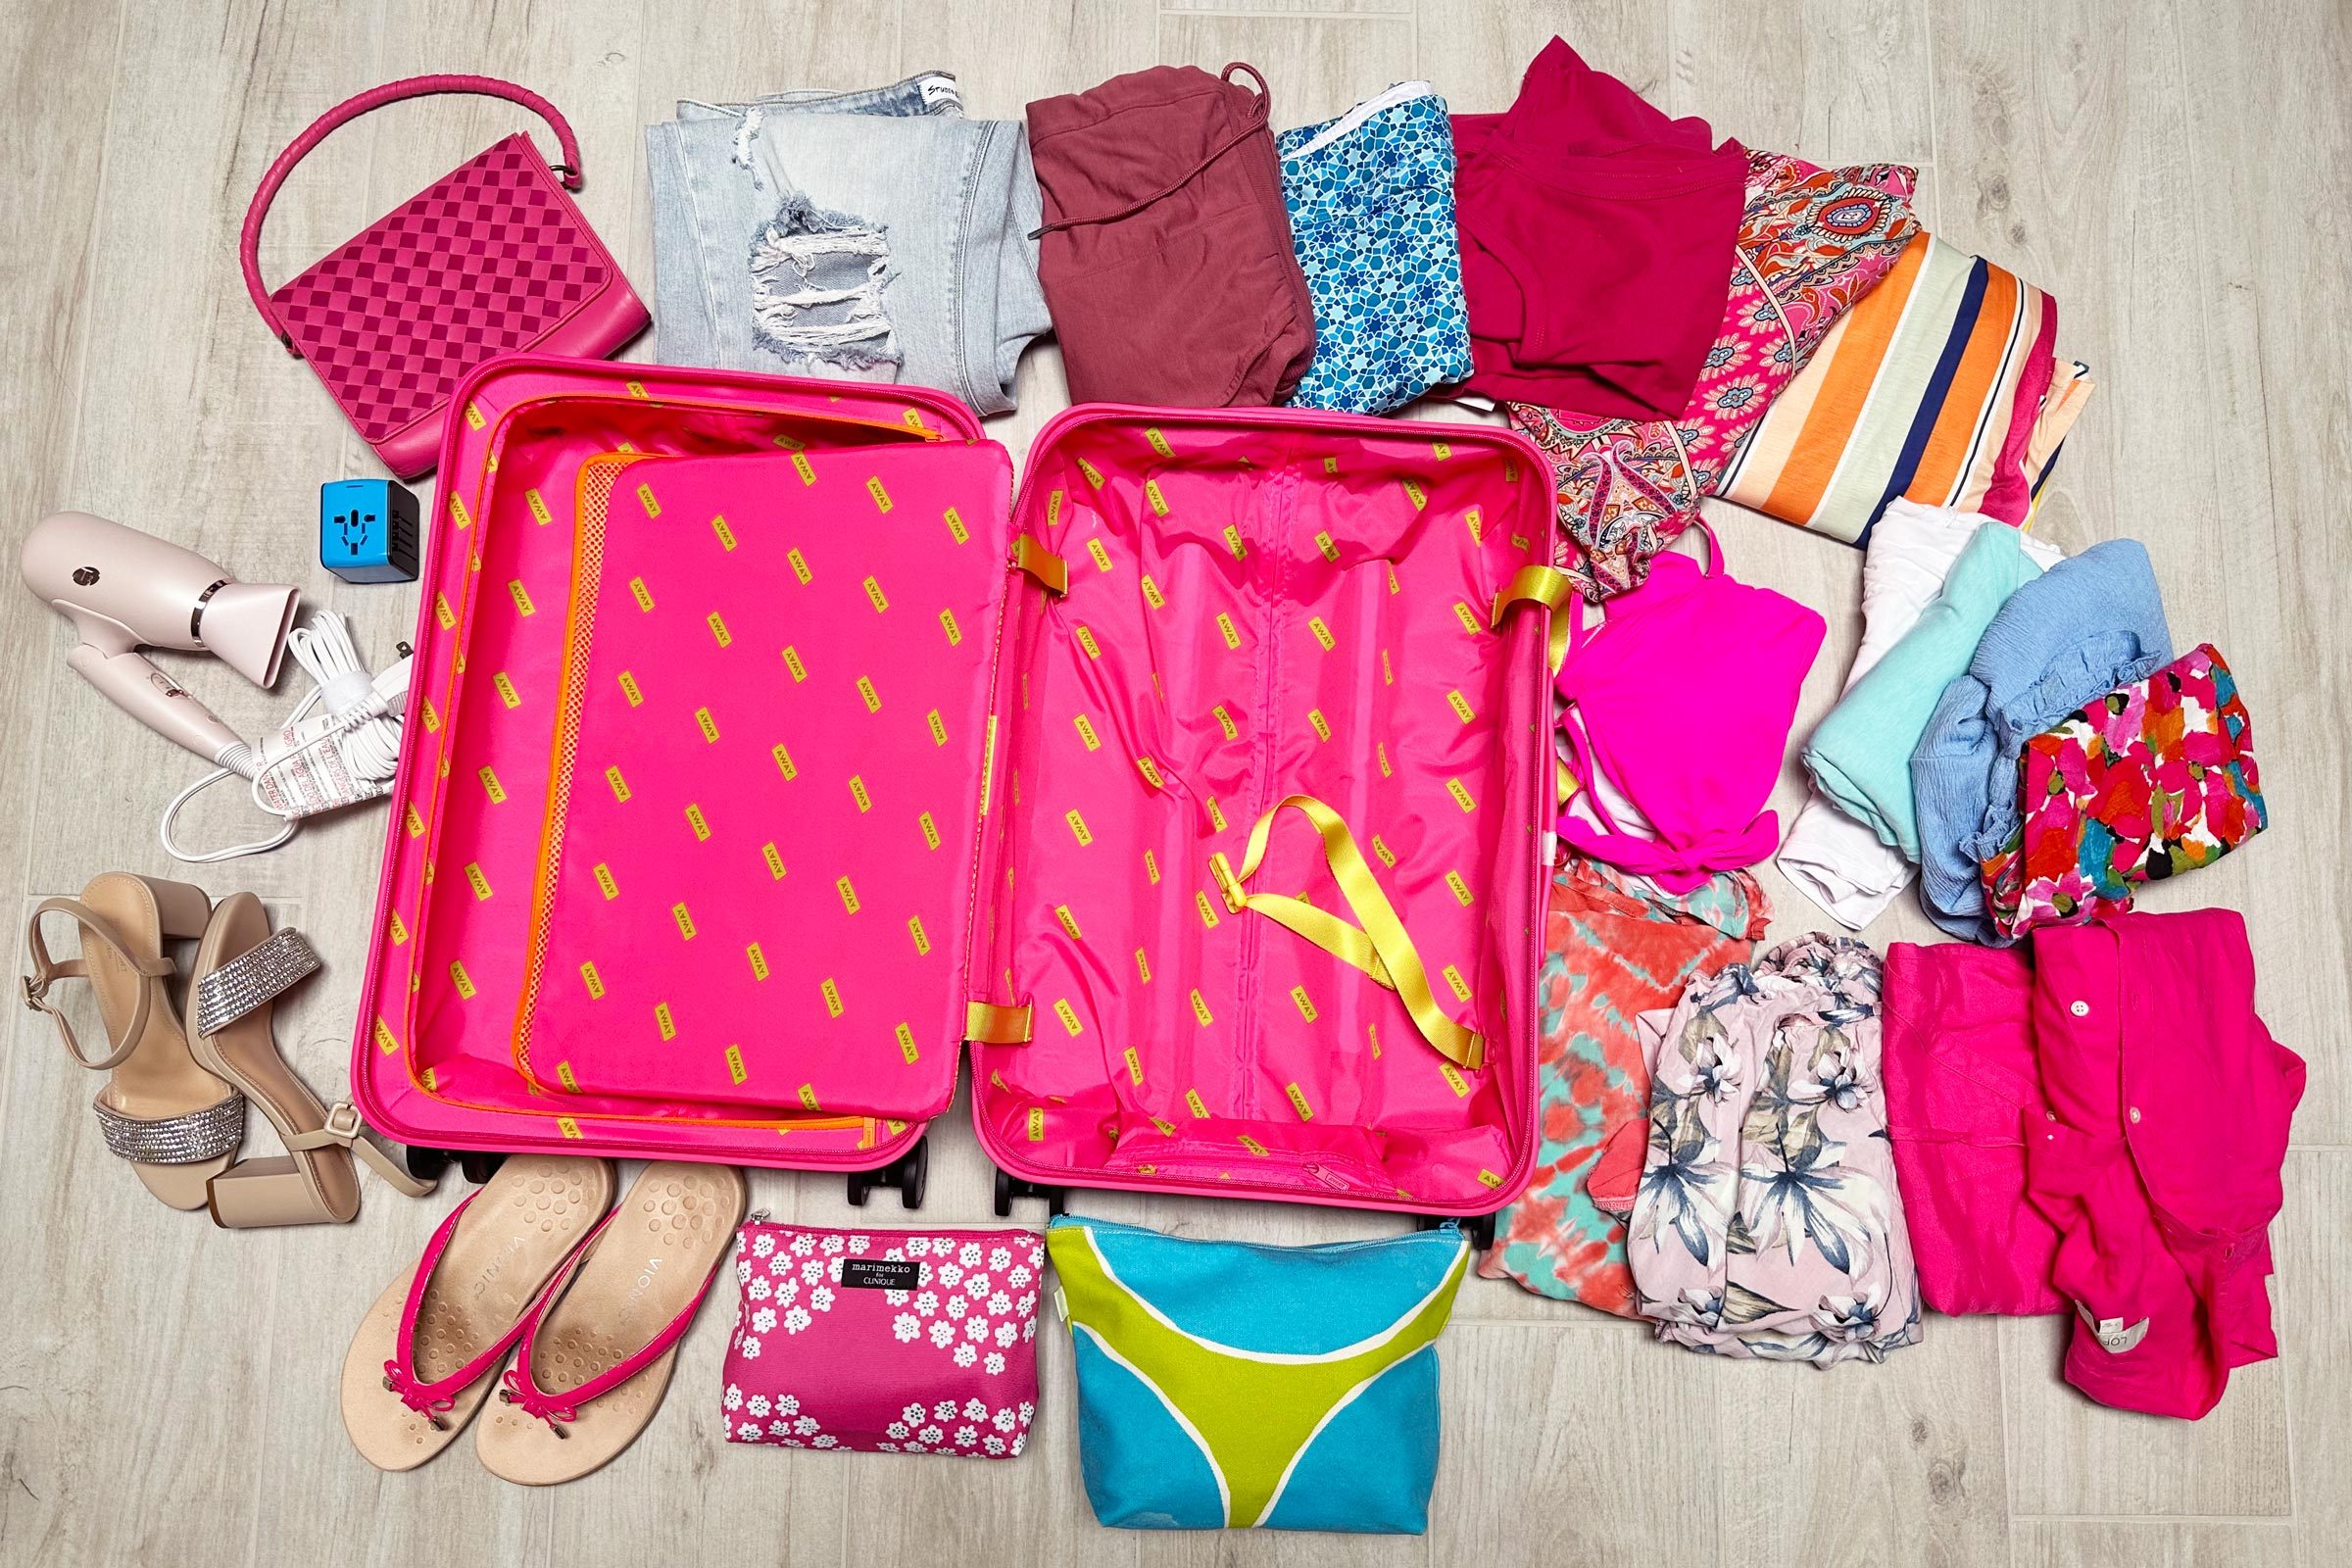 I Traveled for 10 Days With Away's Bigger Carry-on